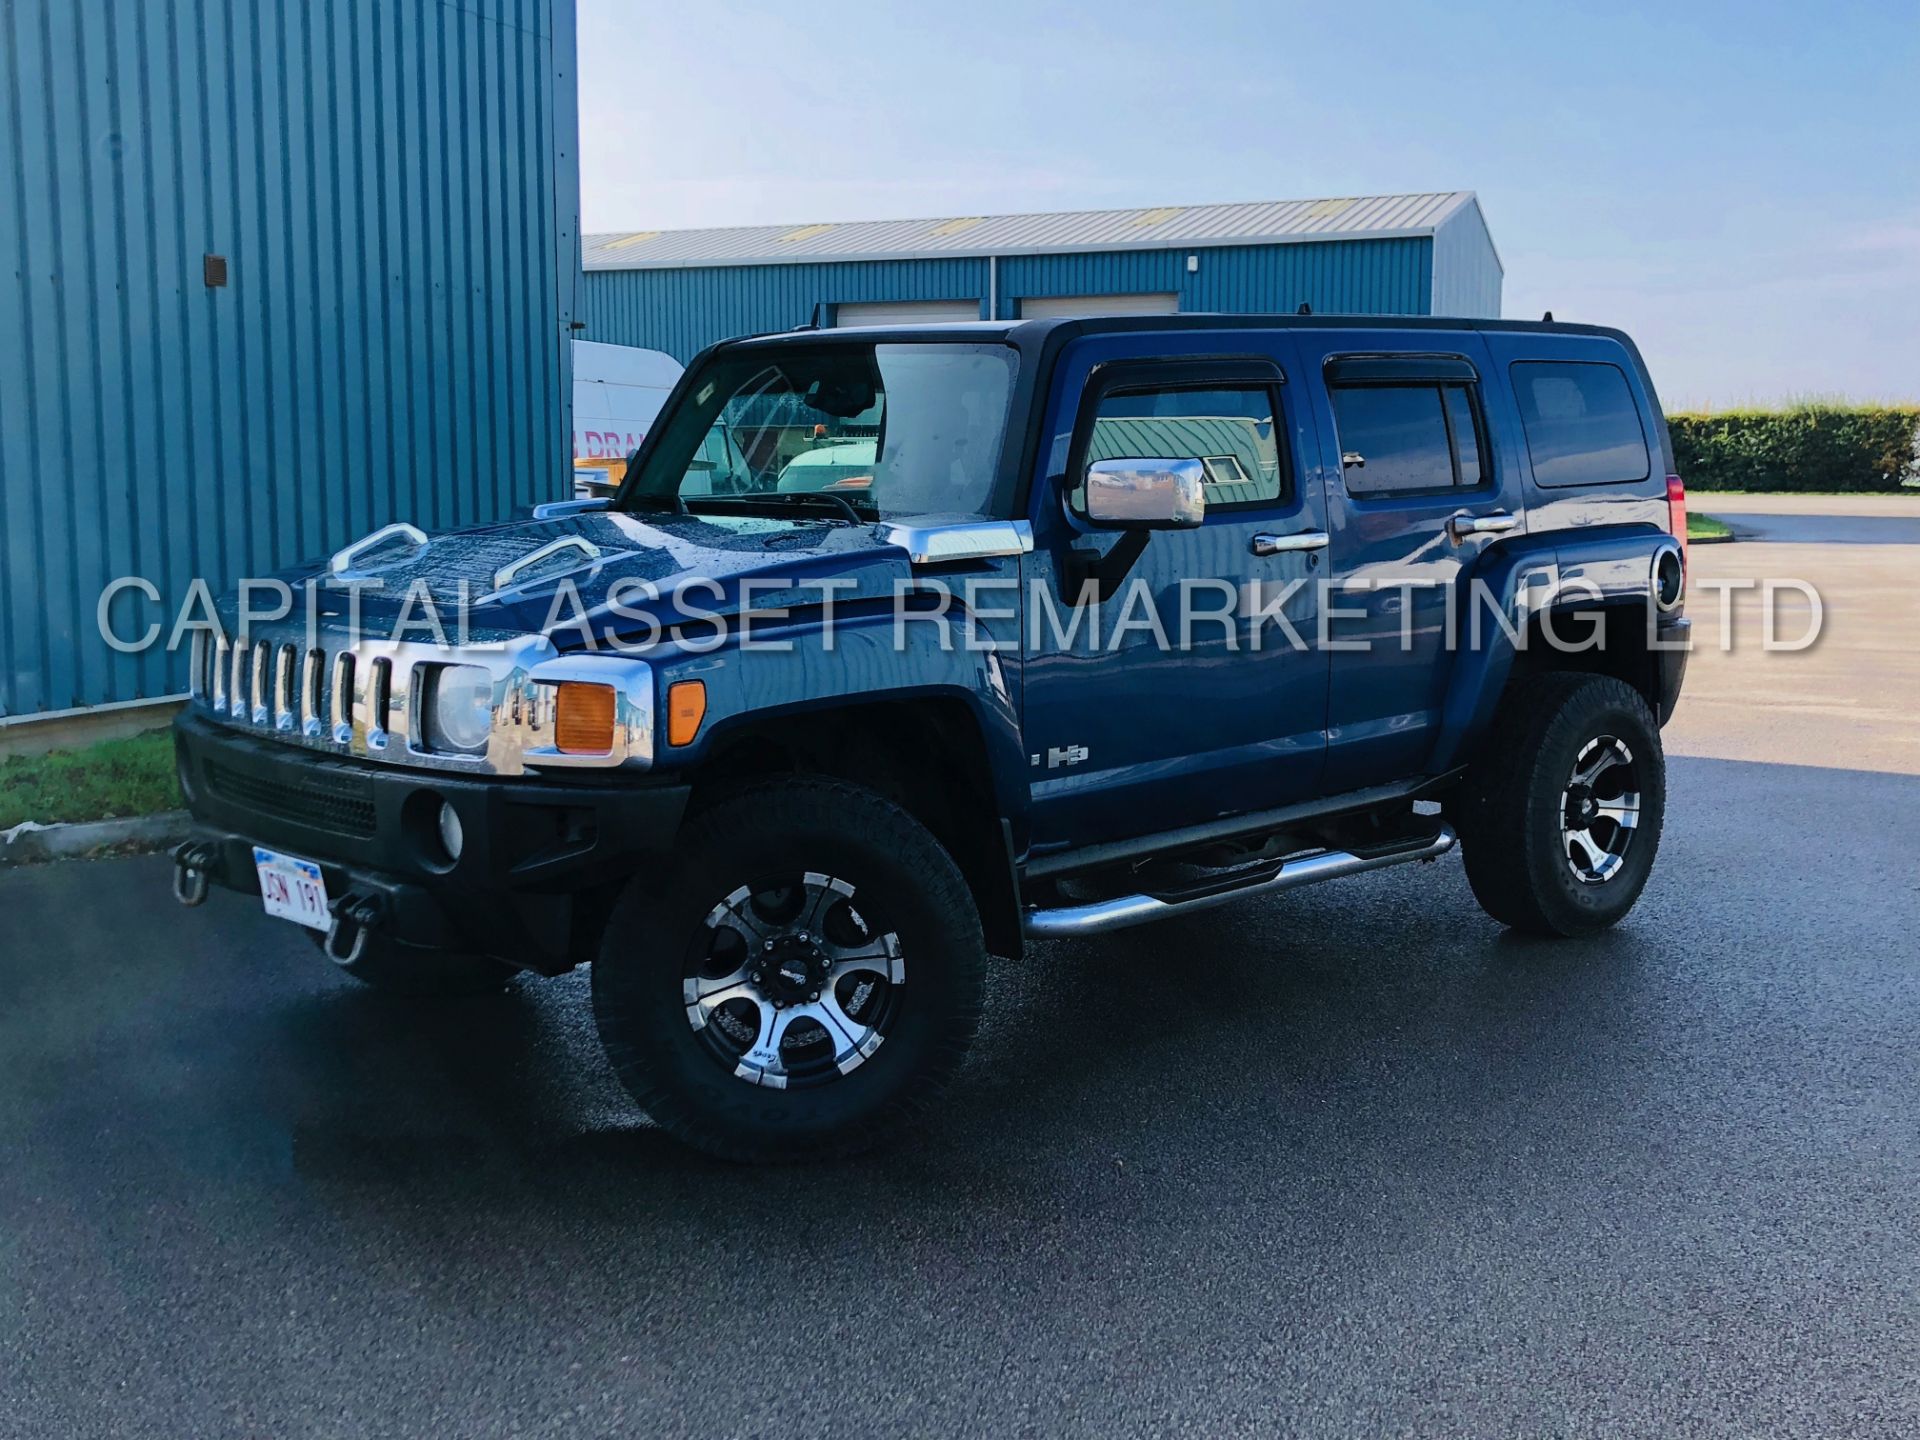 (On Sale) HUMMER H3 *VORTEC EDITION* (2006) *4X4* '3.5L - AUTOMATIC' **ULTRA RARE** - Image 8 of 54